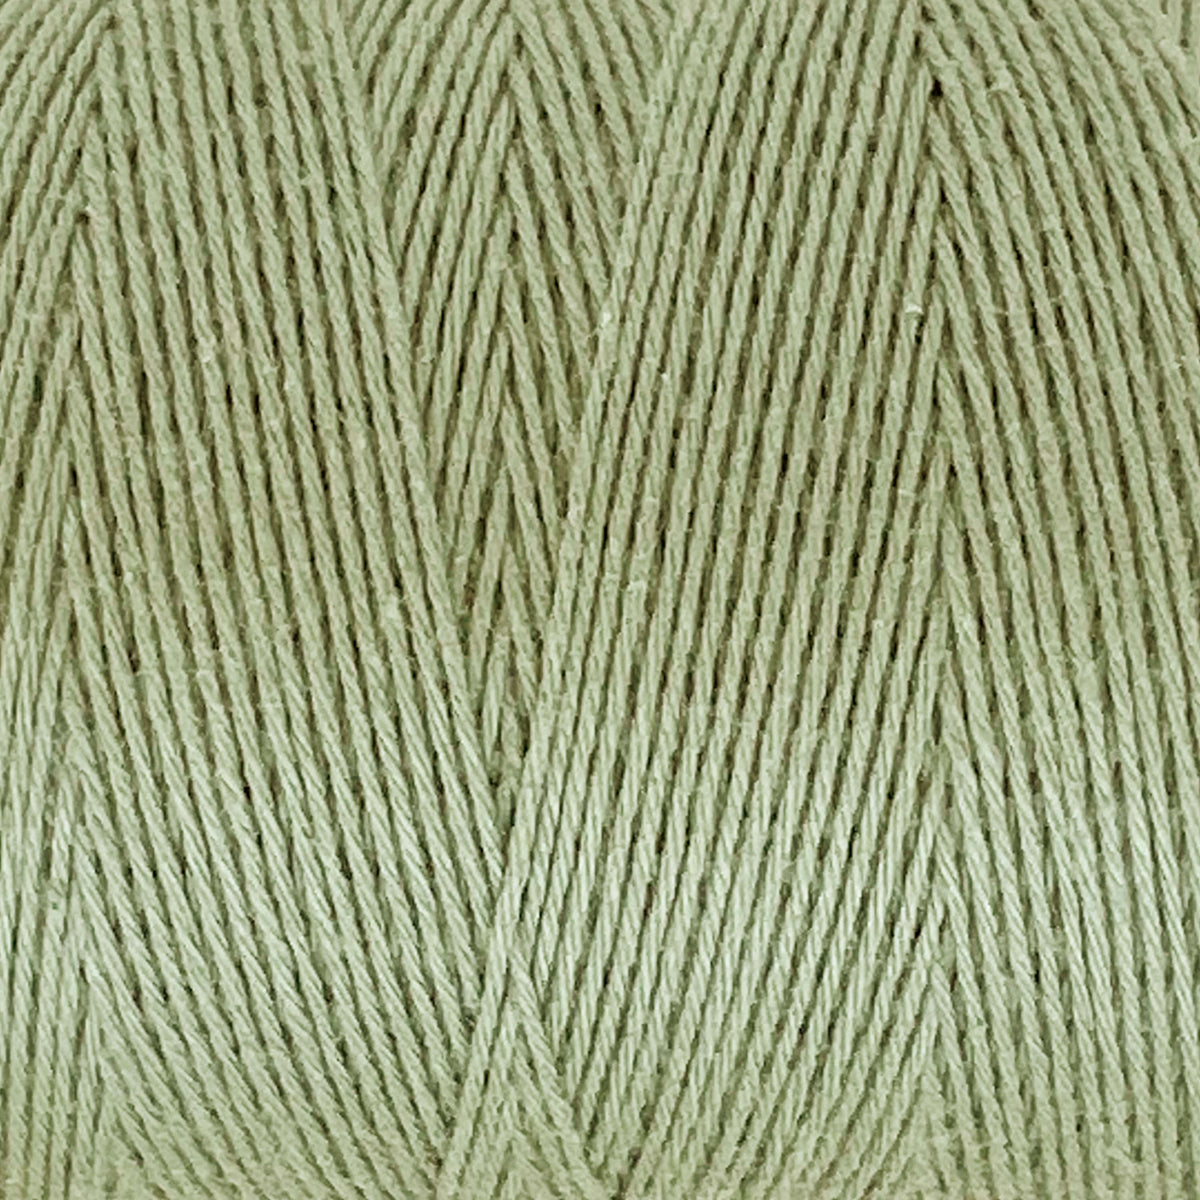 8/4 Cotton Warp Yarn - Natural and Colors - The Creativity Patch - Lucy  Jennings